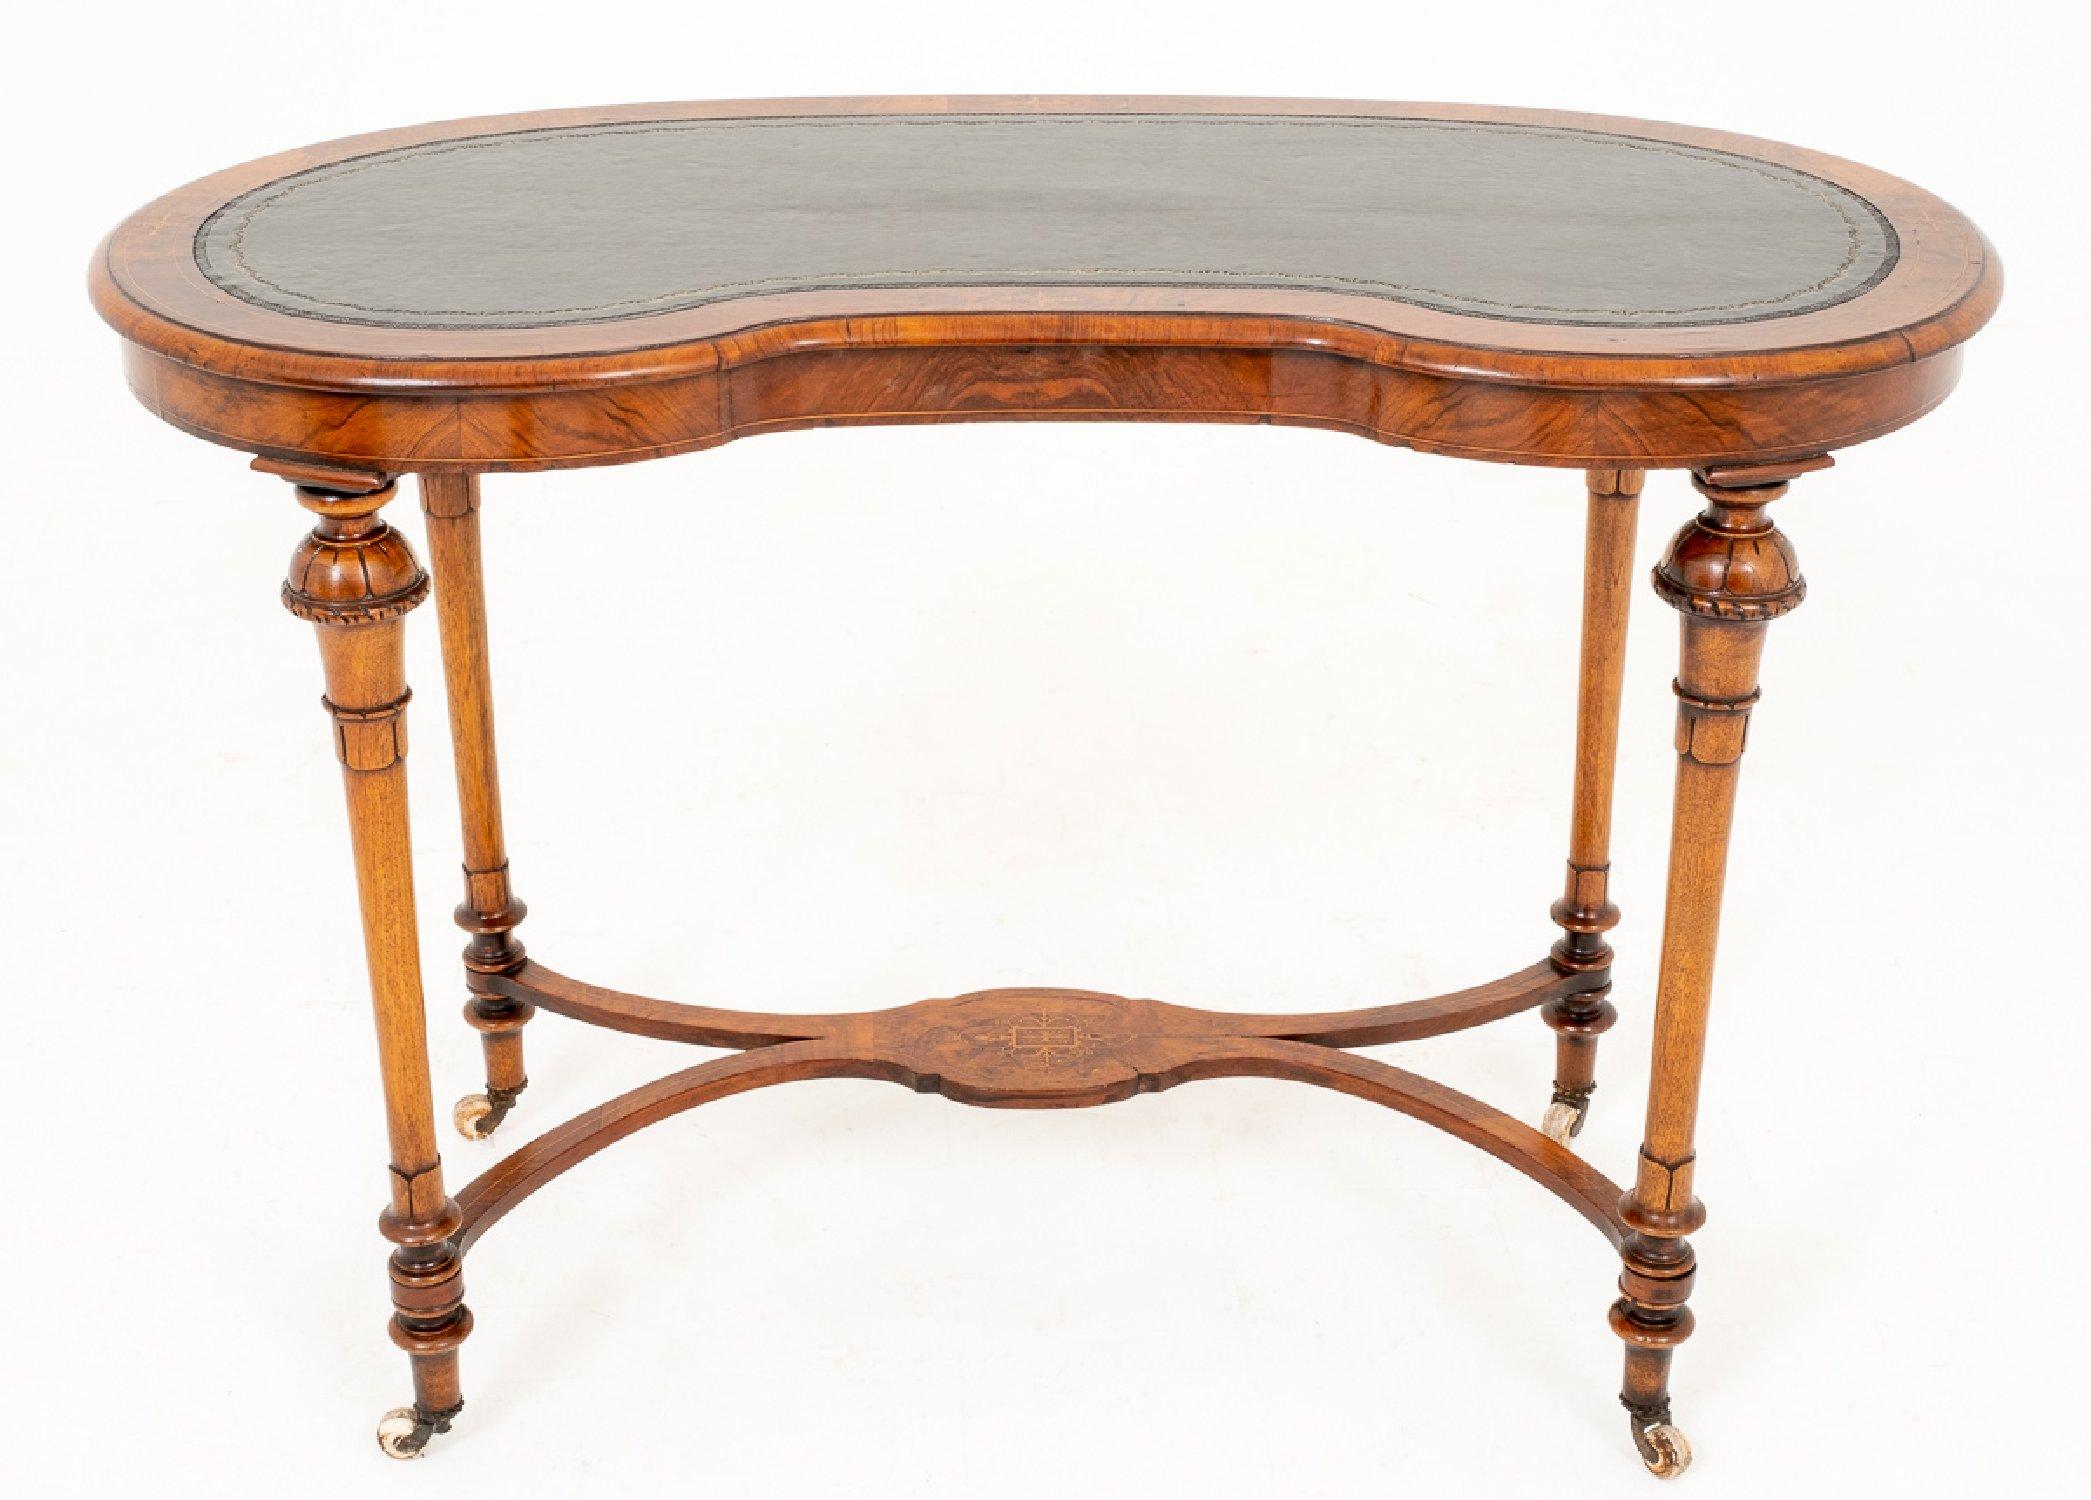 This mid-19th century ladies walnut writing table features beautifully carved and turned cabriole legs on porcelain castors with a shaped stretcher base. The kidney shaped top has an inset tooled leather top with inlay detail around the top edge. It